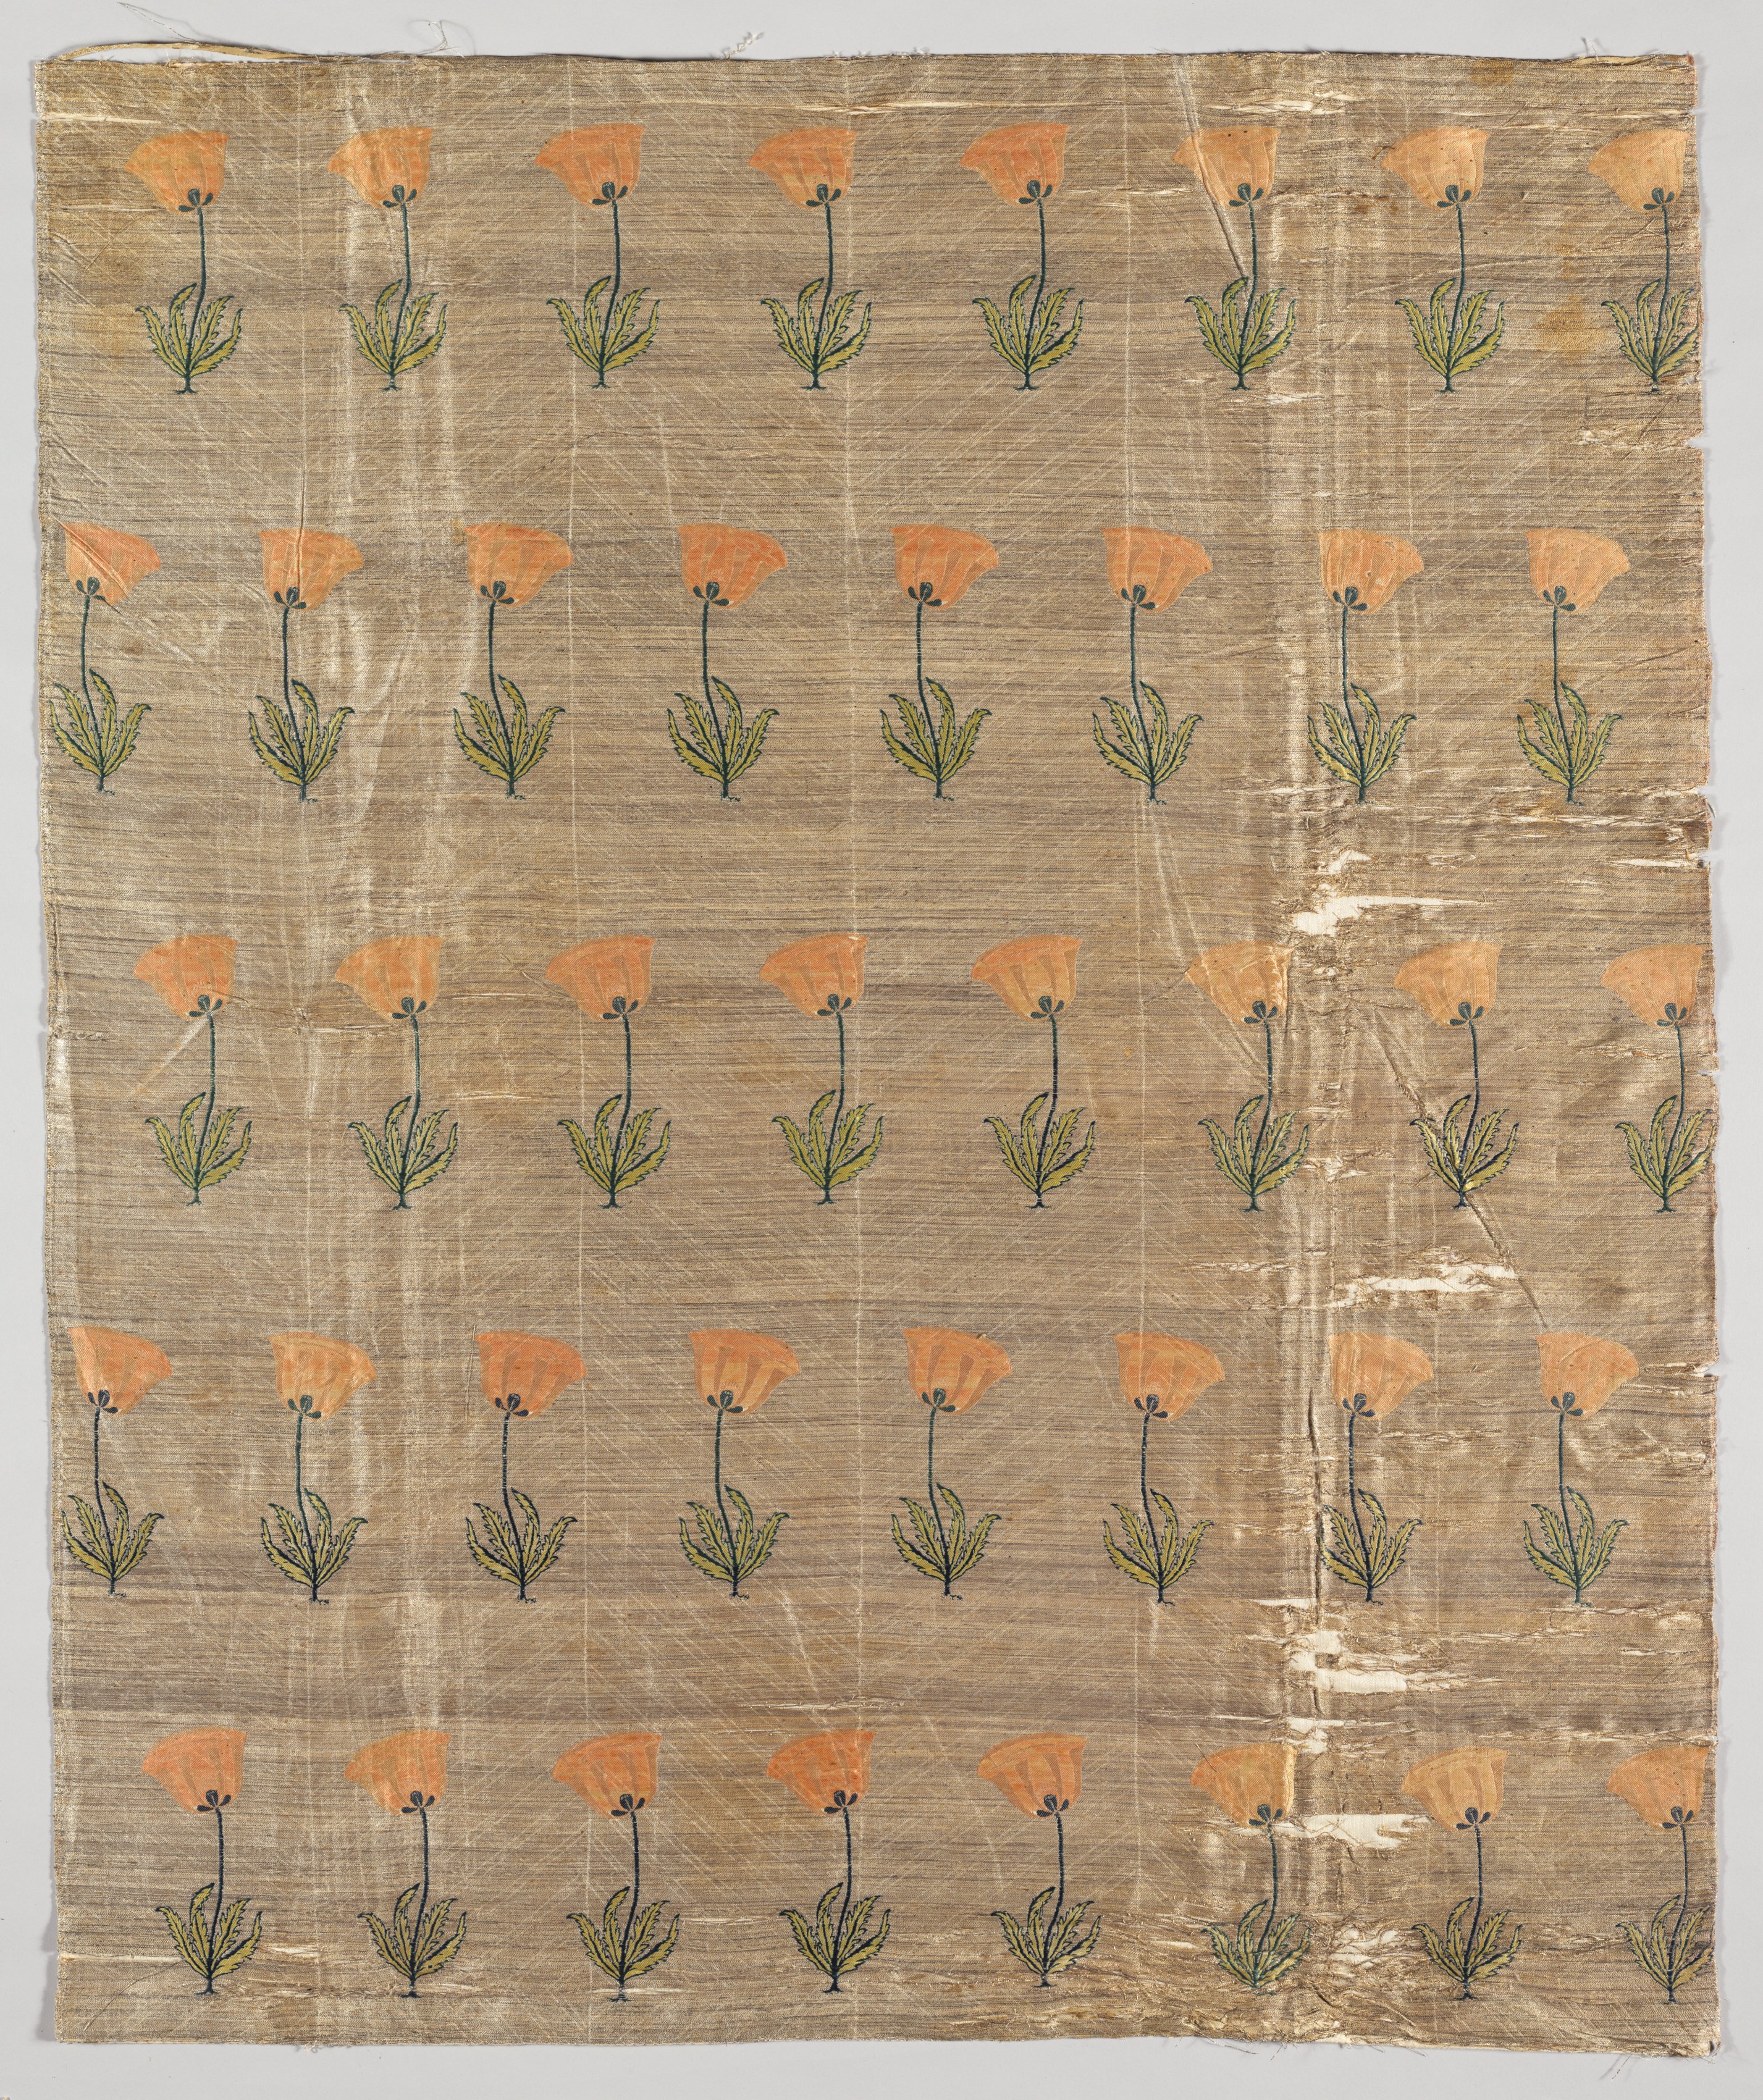 Textile with field of poppies on a golden ground